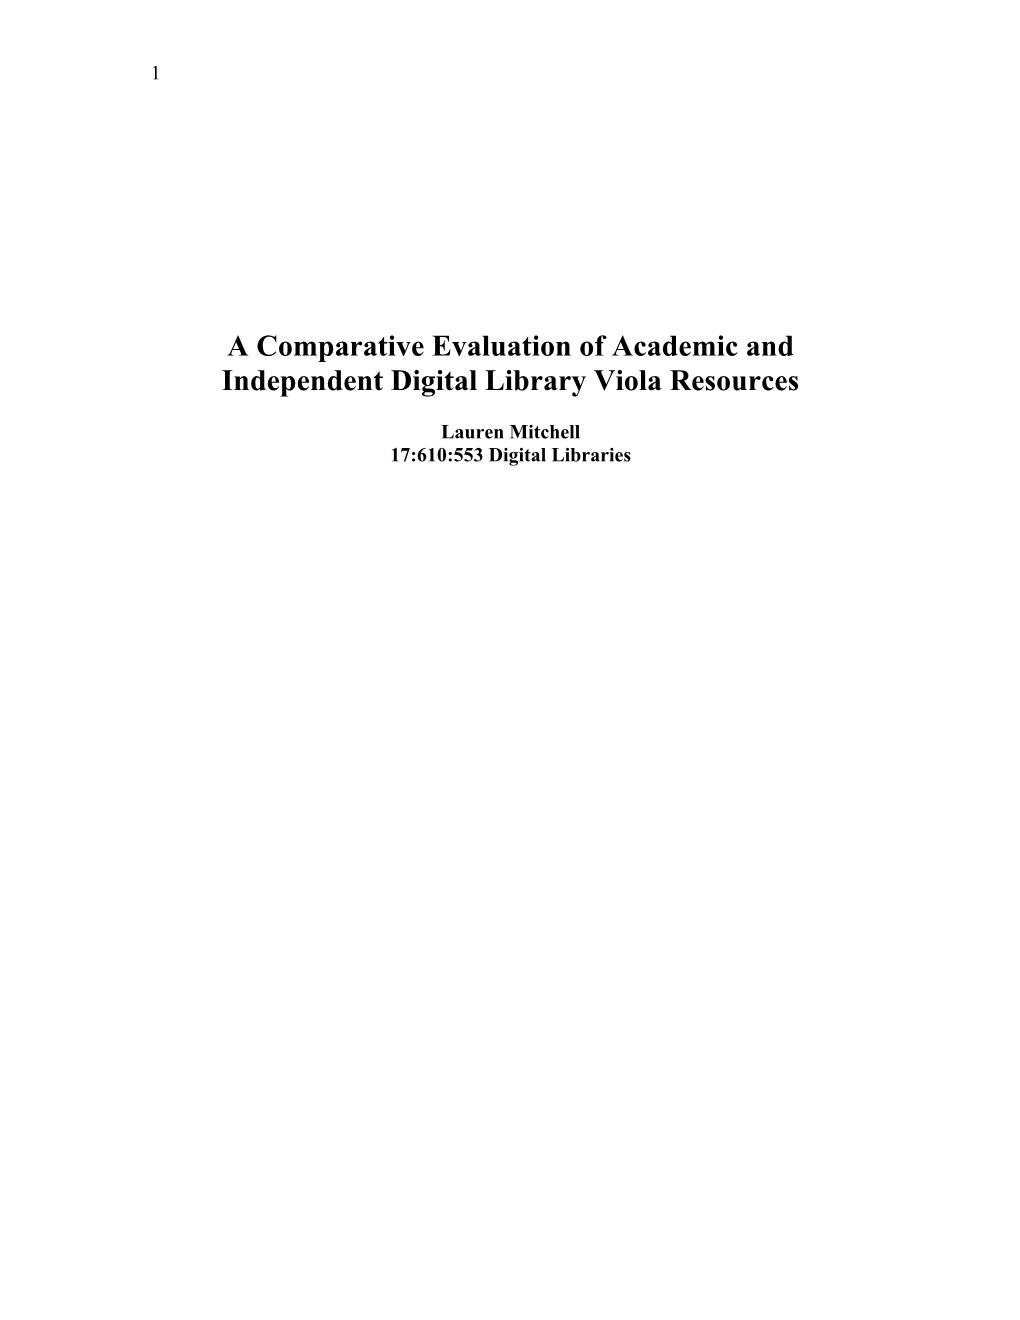 A Comparative Evaluation of Academic and Independent Digital Library Viola Resources